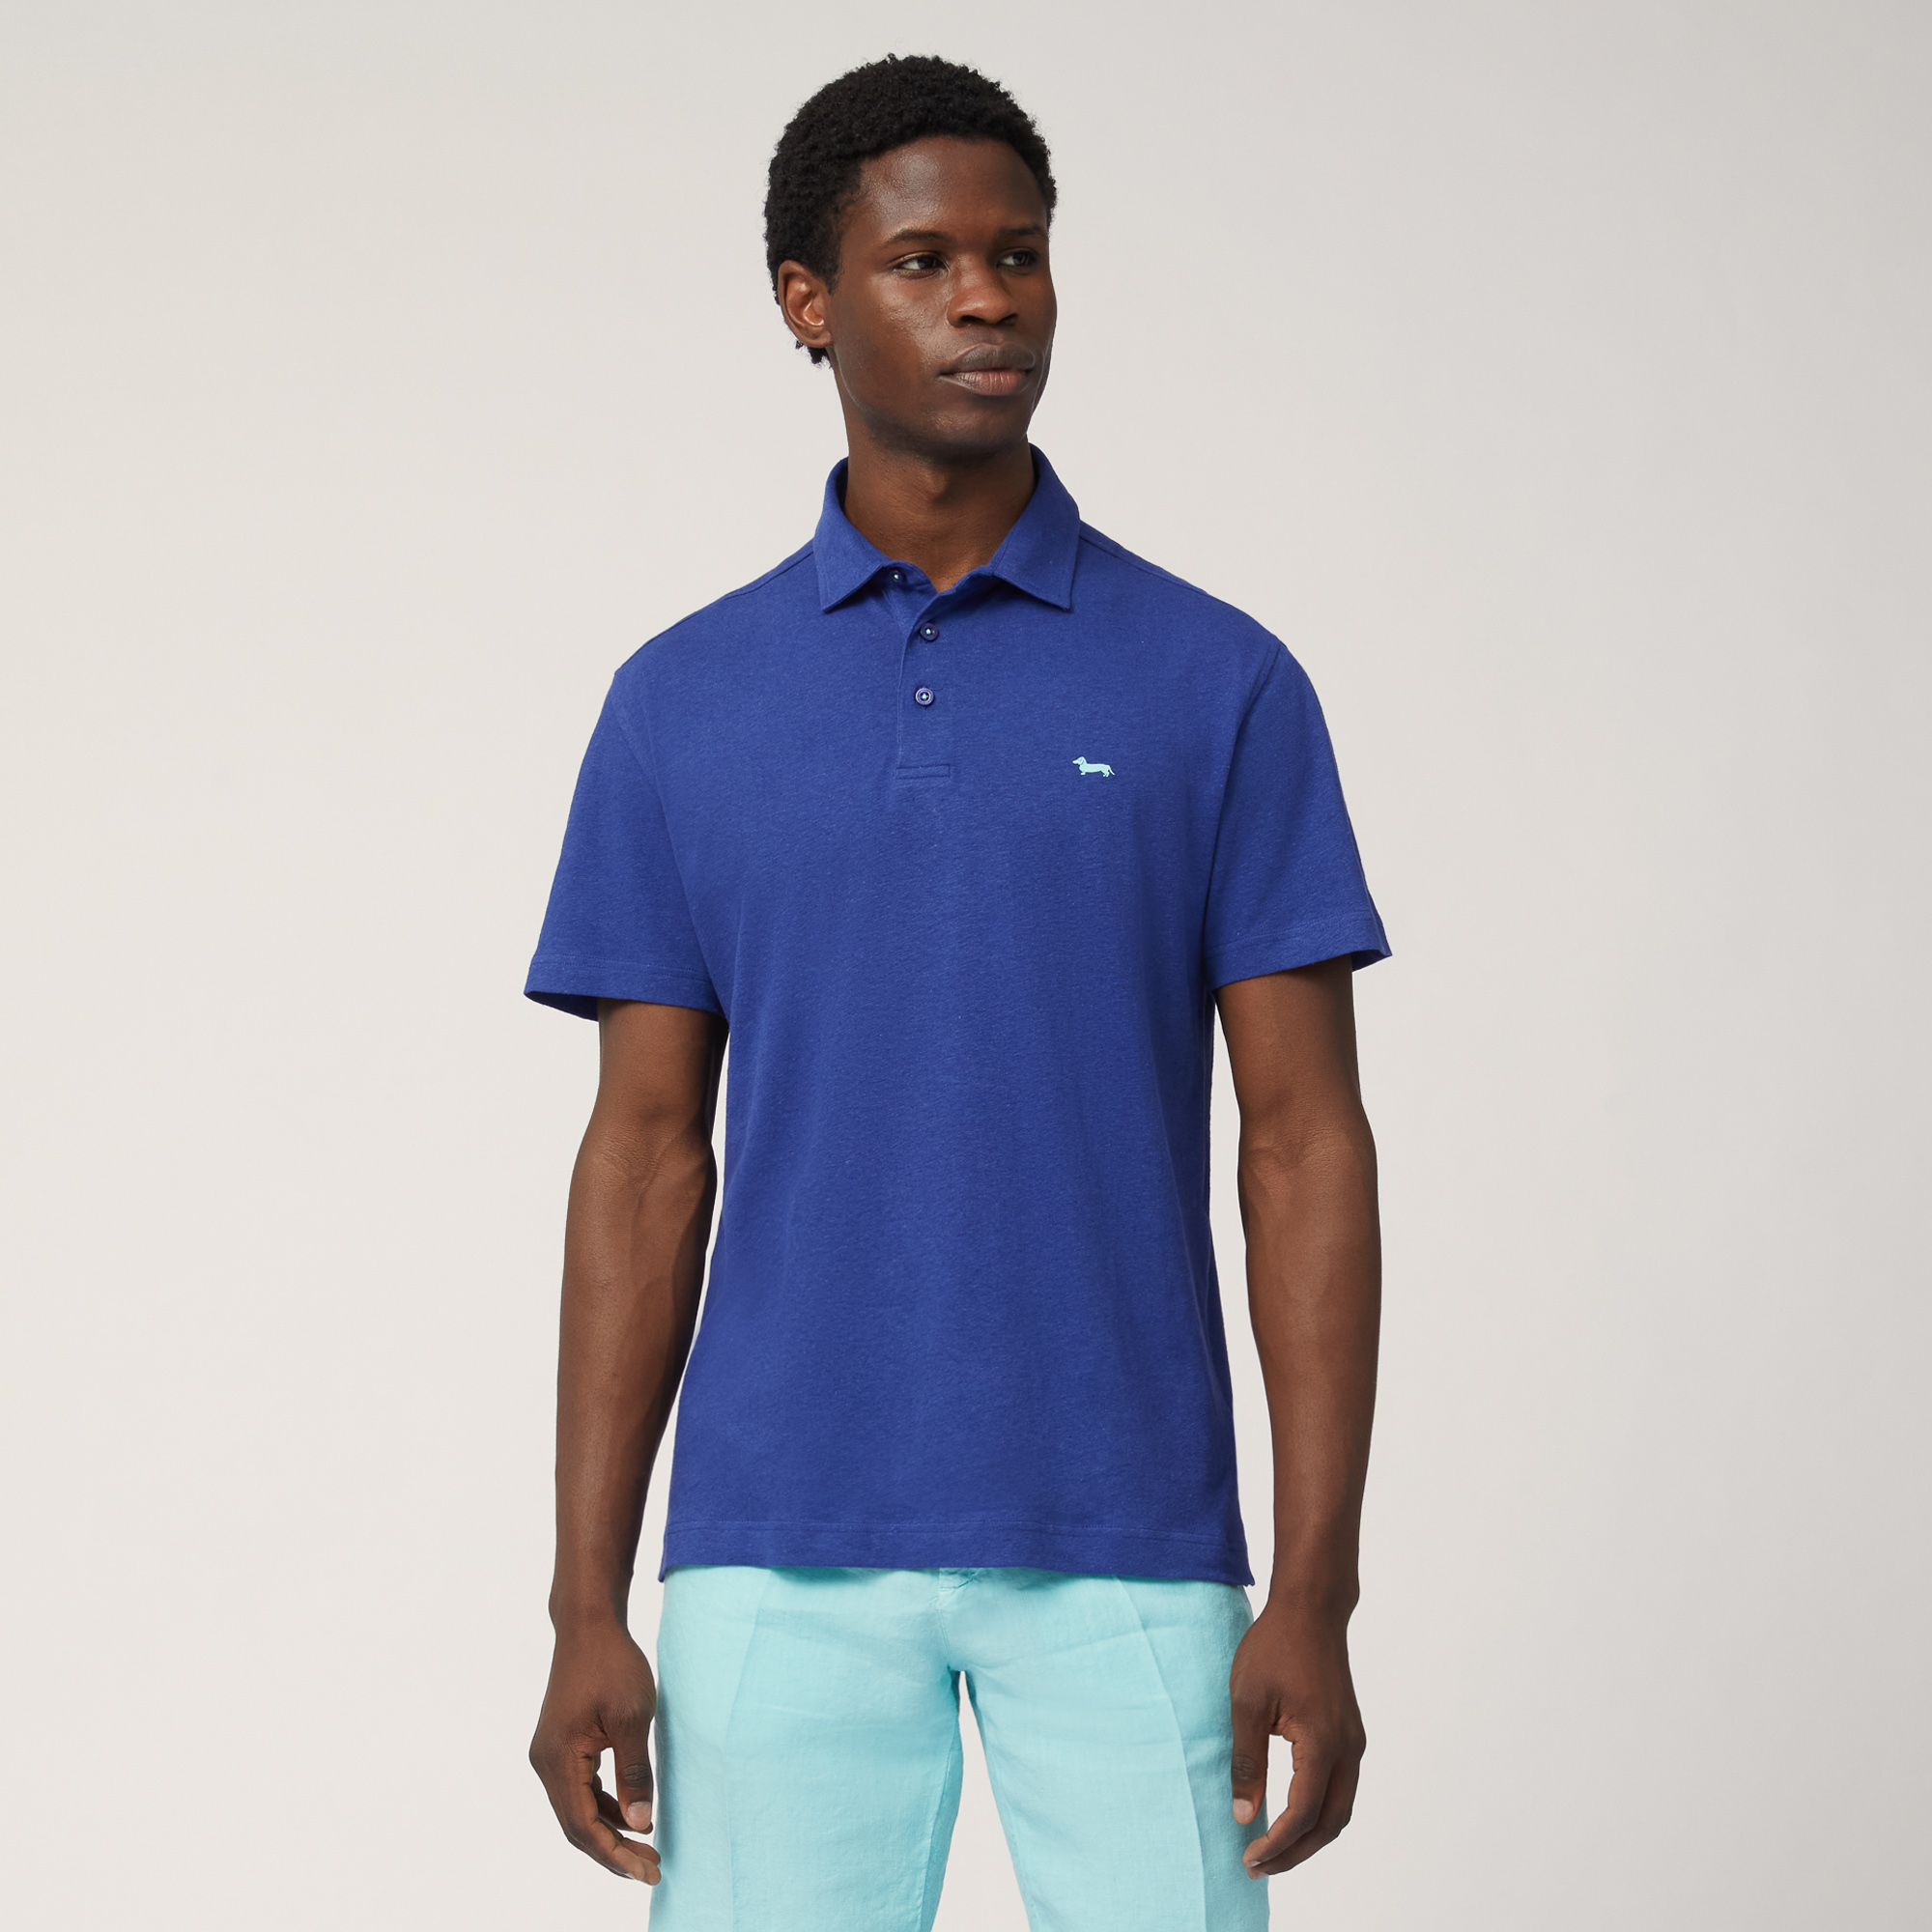 Cotton and Linen Jersey Polo